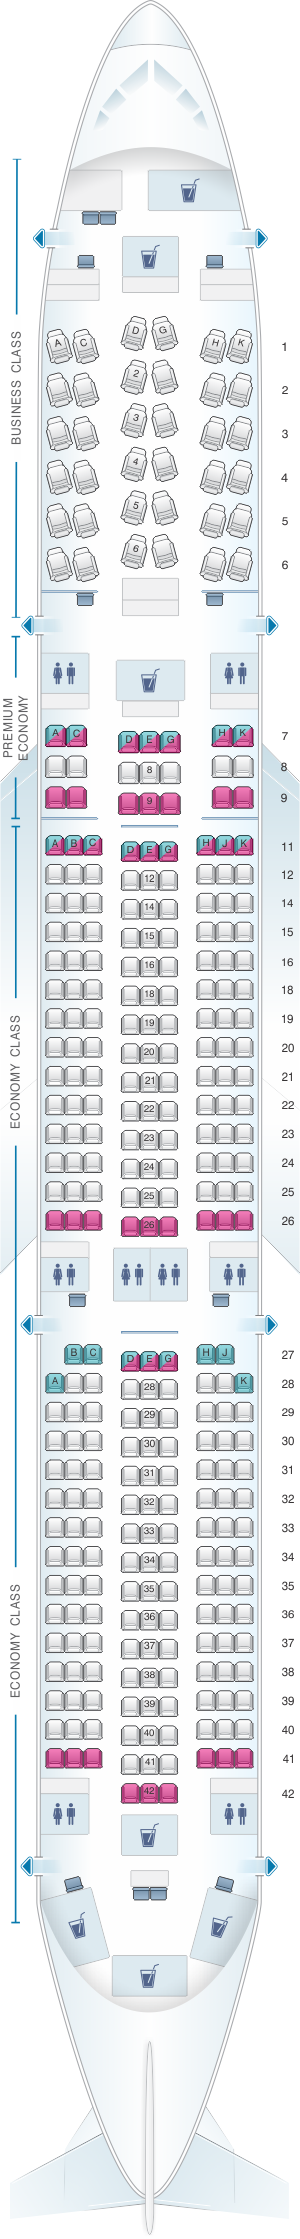 Seat map for Lufthansa Airbus A350 900 Config.2